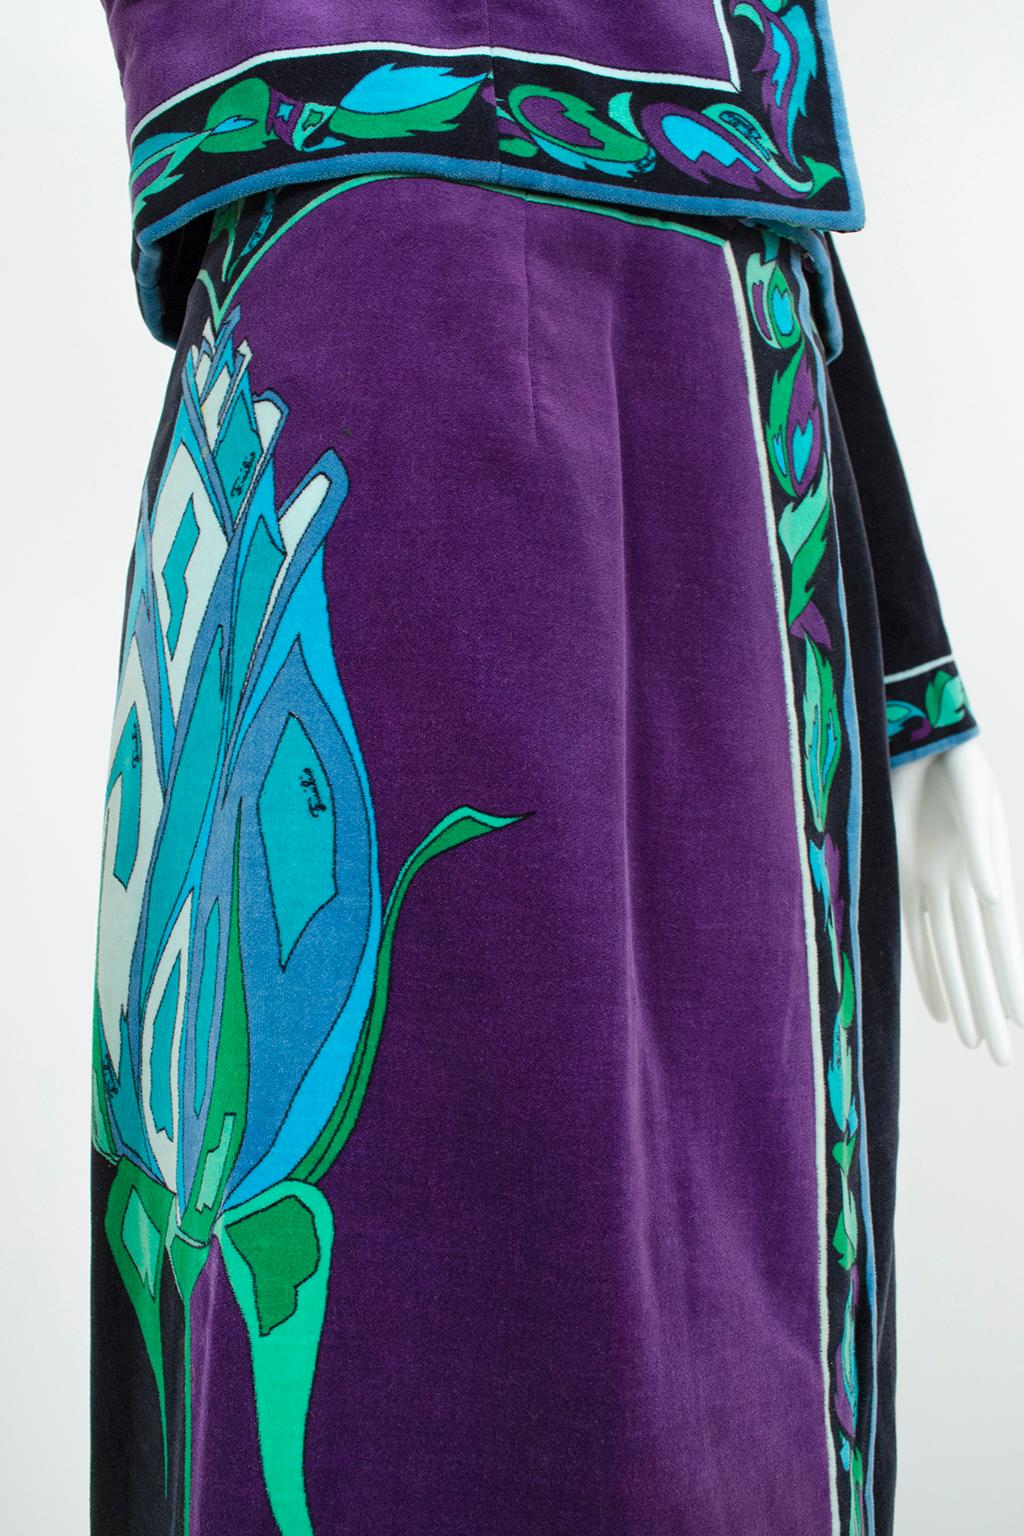 Emilio Pucci Black and Purple Rose Velvet Jacket and Maxi Skirt, Saks – S, 1971 For Sale 11